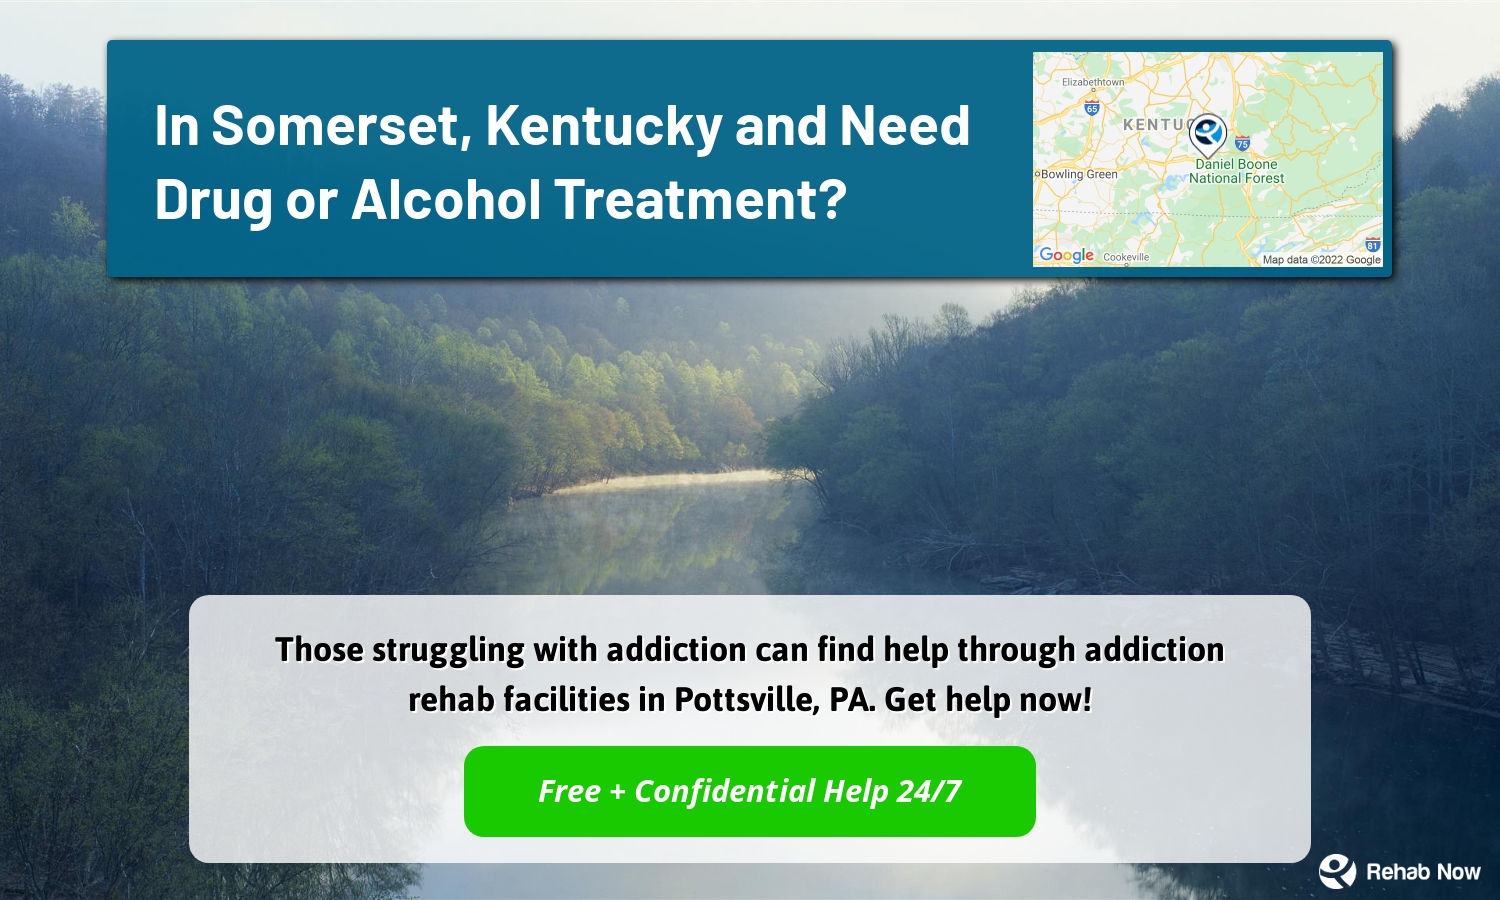 Those struggling with addiction can find help through addiction rehab facilities in Pottsville, PA. Get help now!